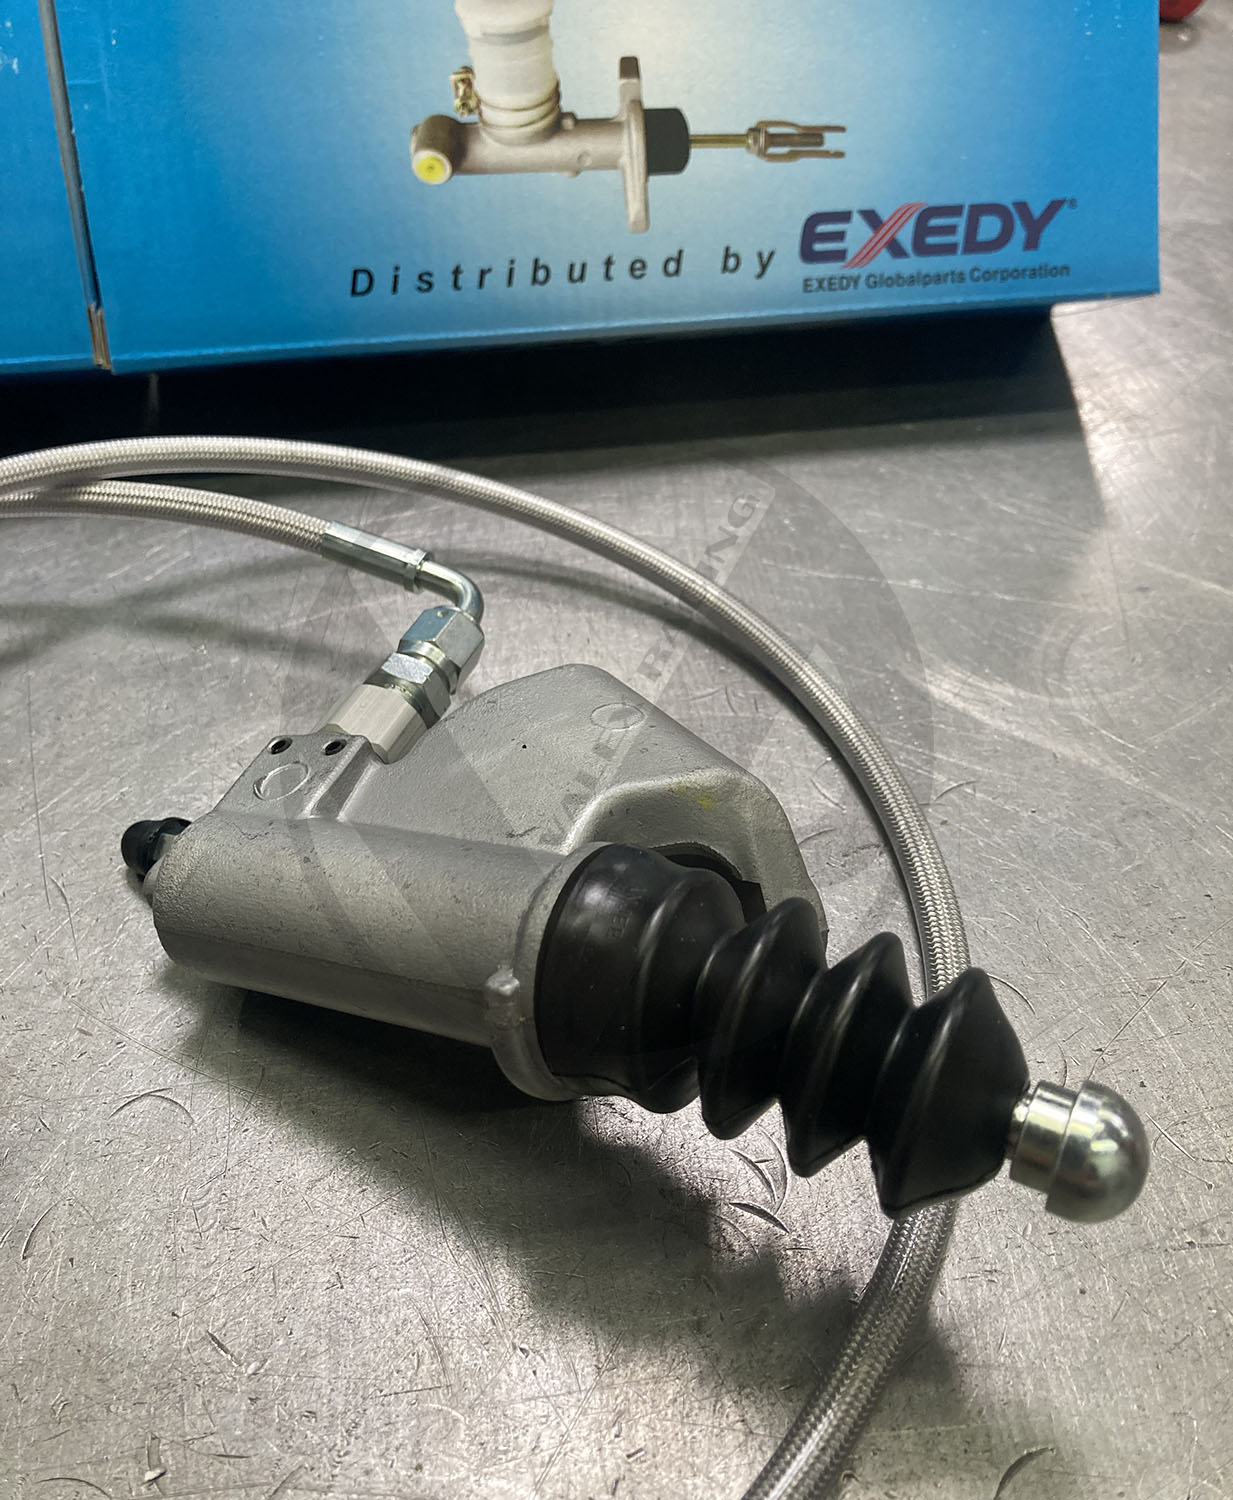 Honda Civic 12-15 Si Exedy Bolt In EM1 CMC & Slave Kit 9th Gen (No Modification Required!)